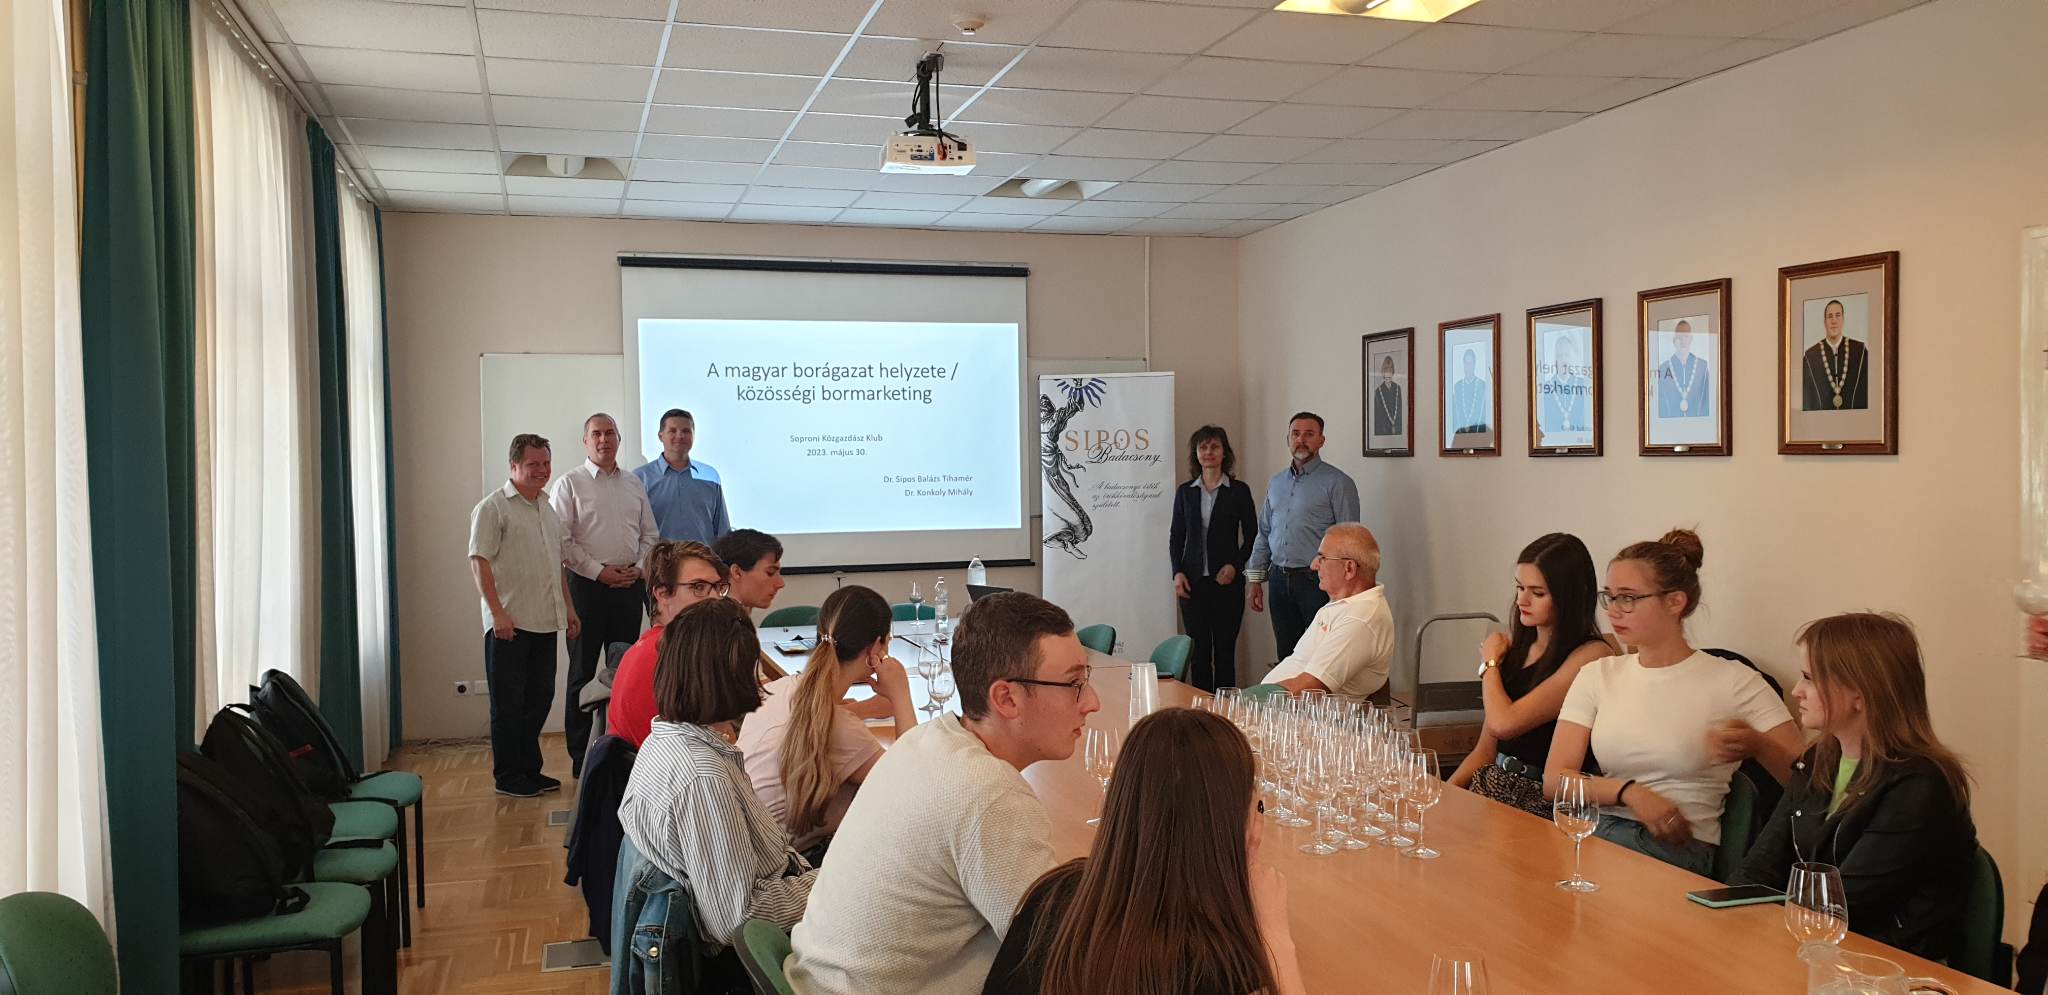 University of Sopron holds Wine marketing event for students